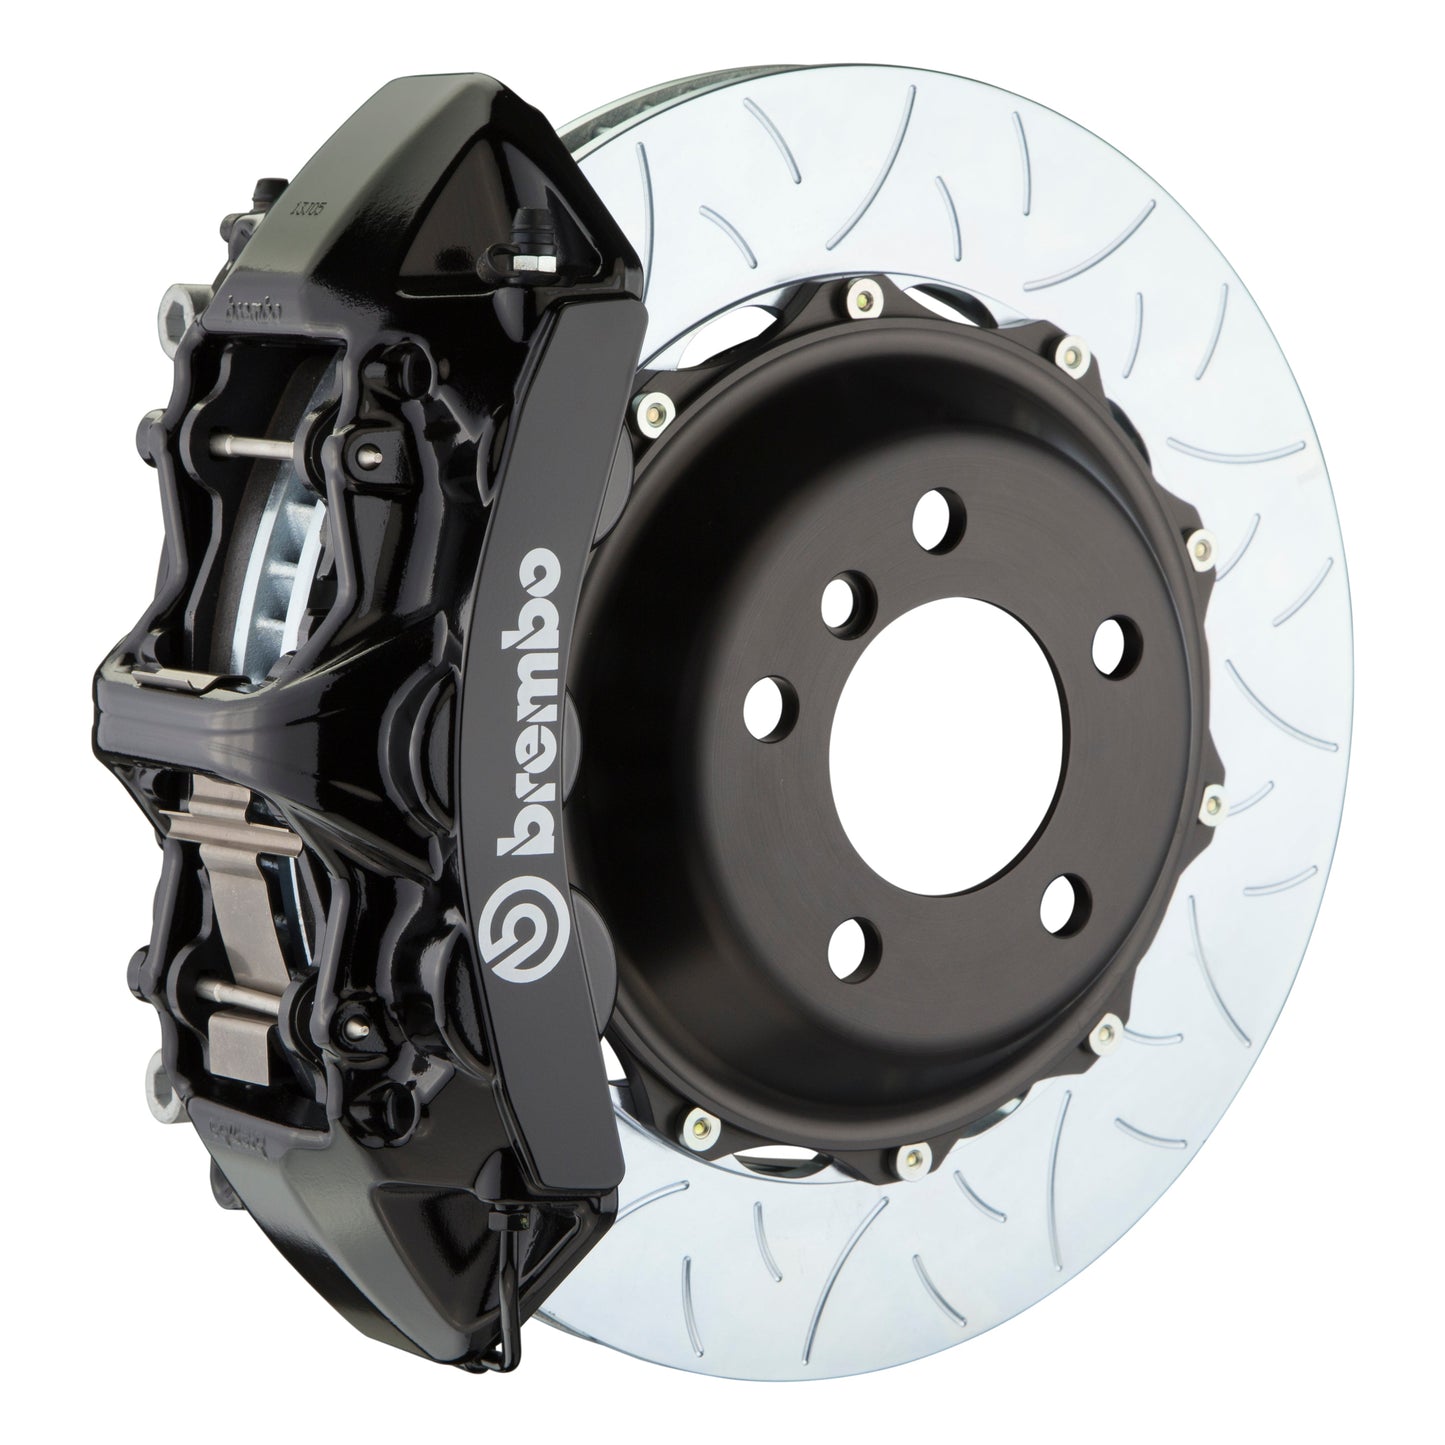 Front Brembo Gran Turismo Braking Upgrade Kit (1M19045A) GT / M6 Caliper with 6-Pistons & 2-piece 380x32 Disc